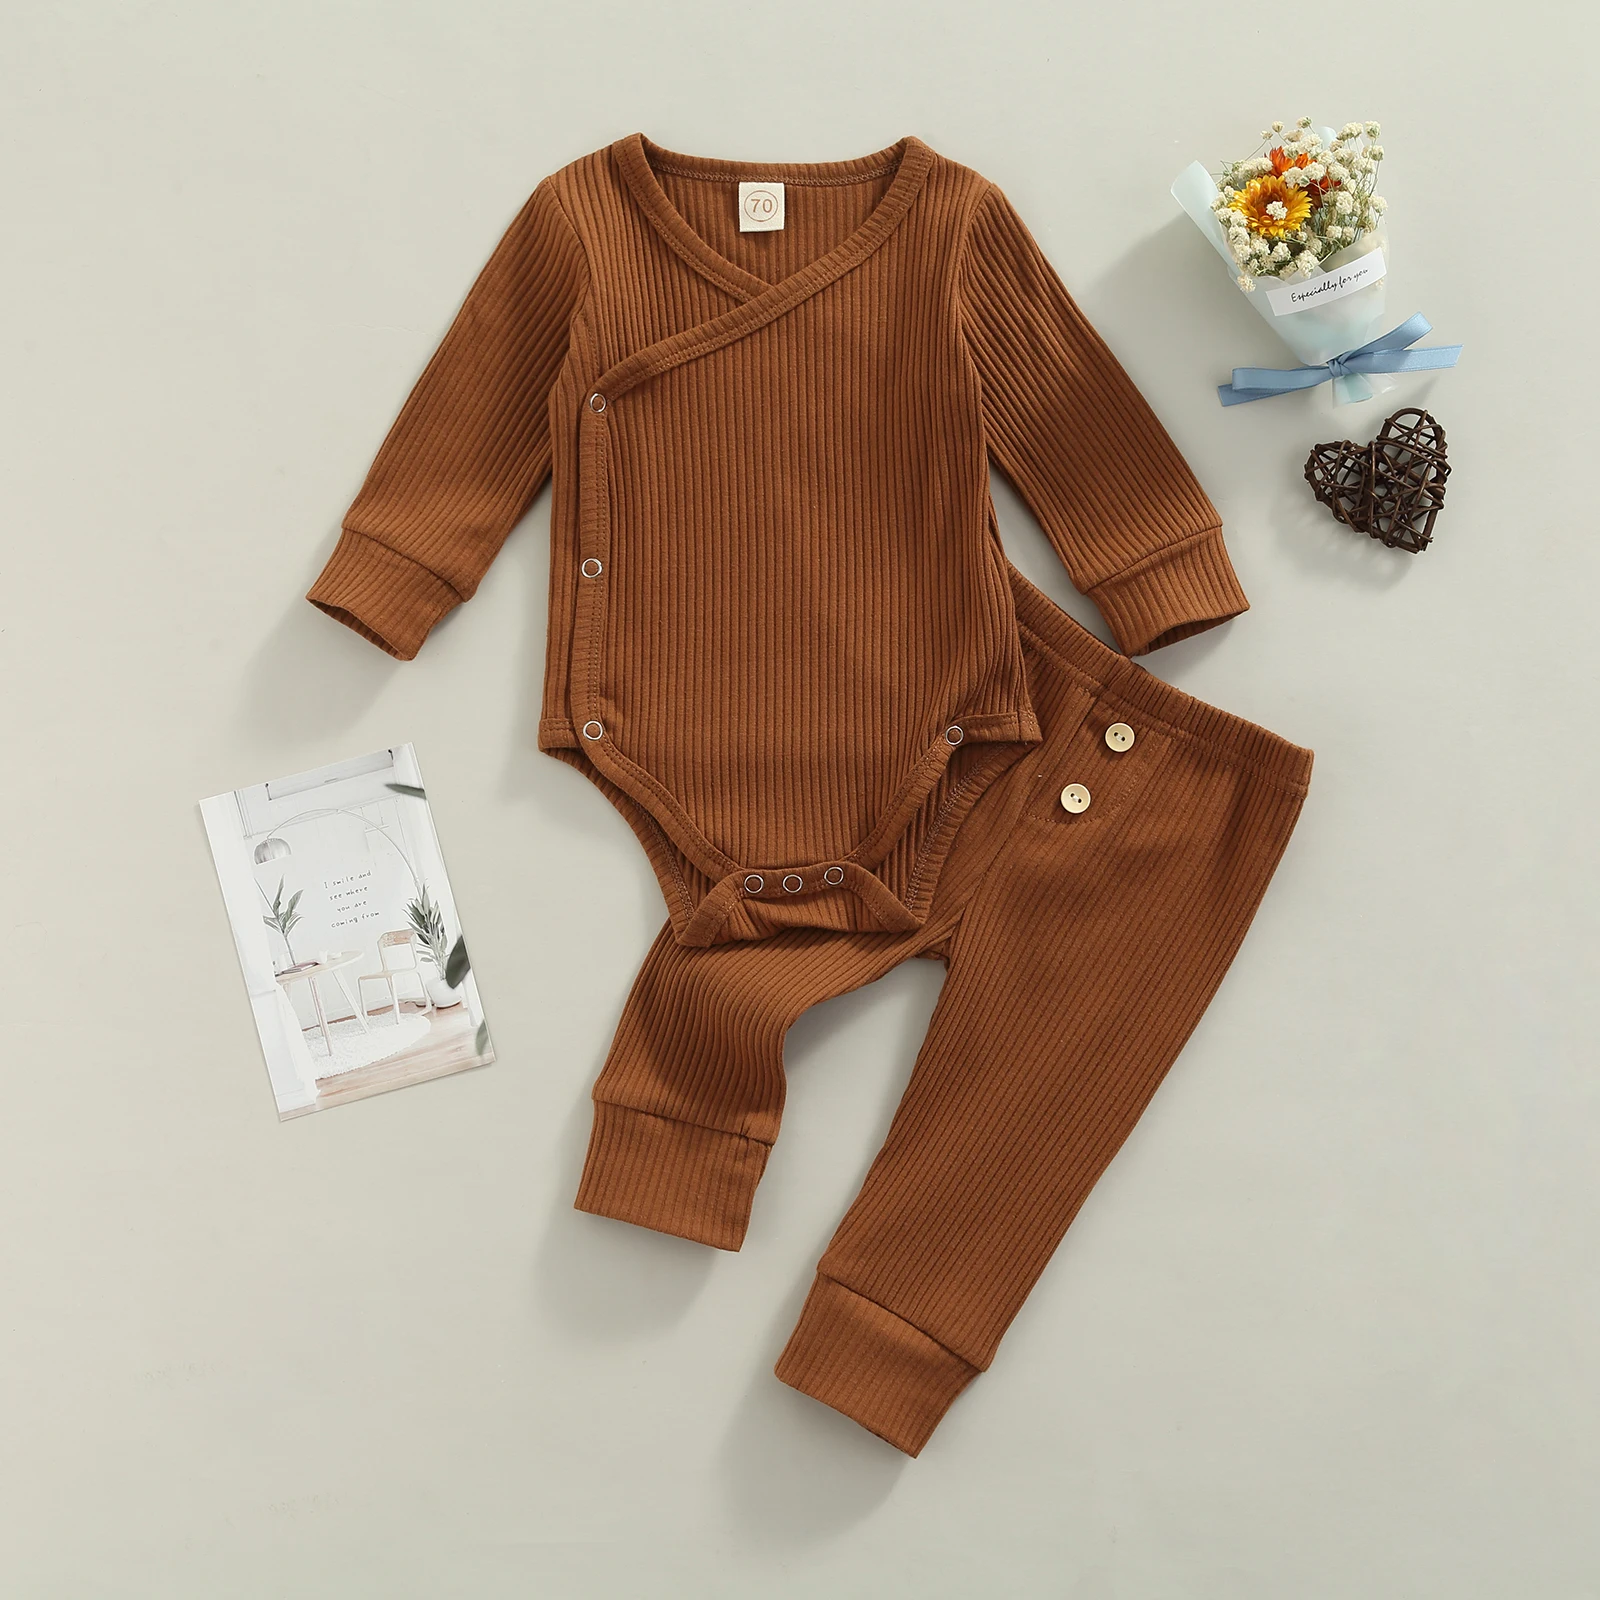 baby dress and set Lioraitiin 0-18M Newborn Infant Baby Boy Girl 2Pcs Autumn Clothing Set Long Sleeve Solid Romper Top Long Pants 4Colors Baby Clothing Set classic